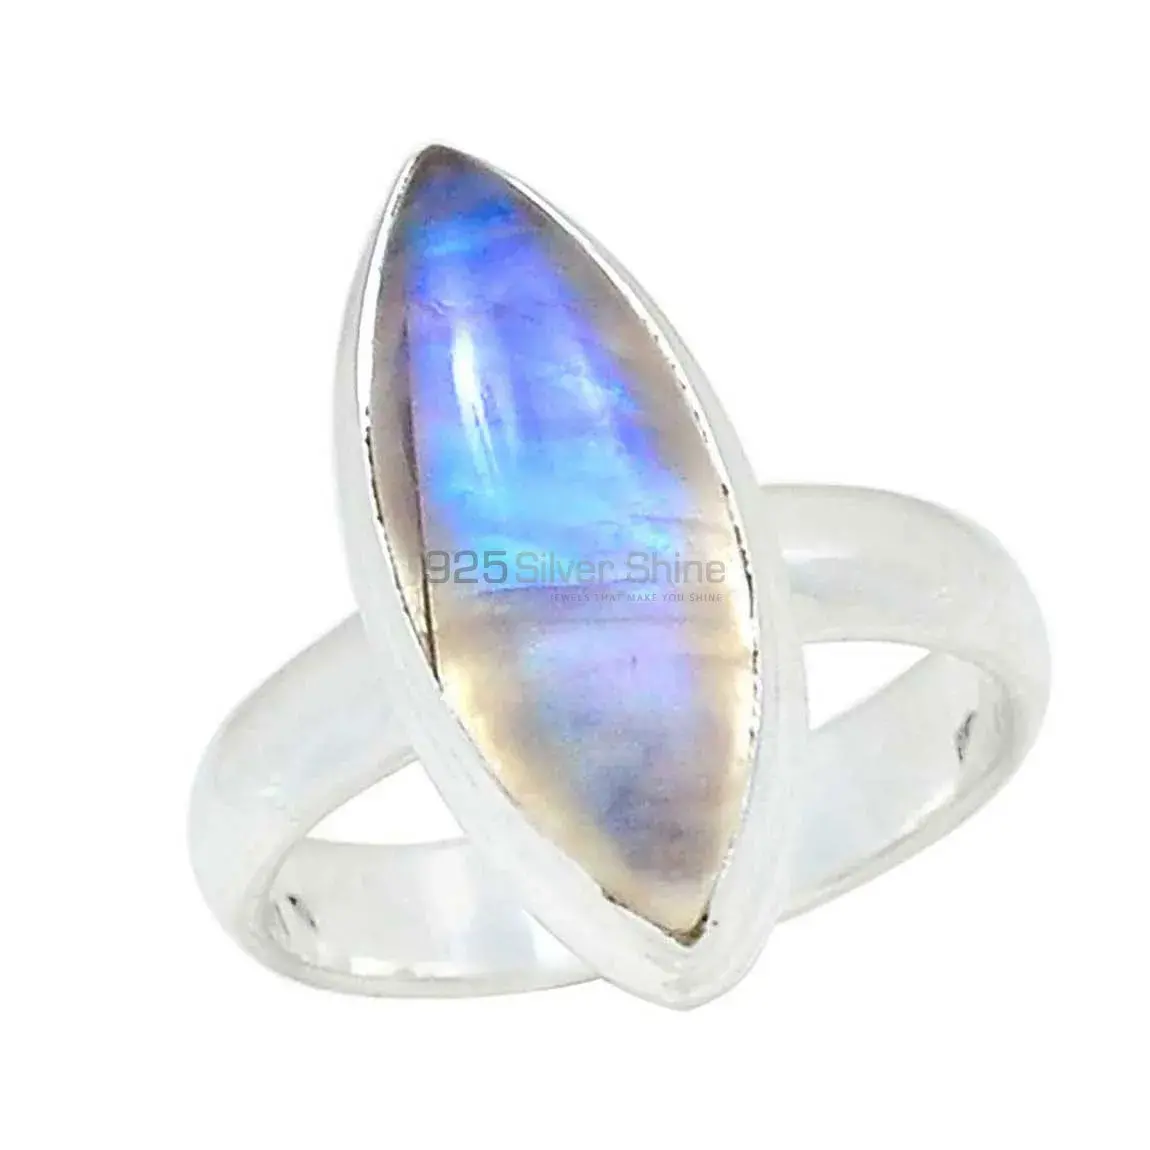 Faceted Cut Multi Marquise Gemstone Rings In Silver 925SR2270